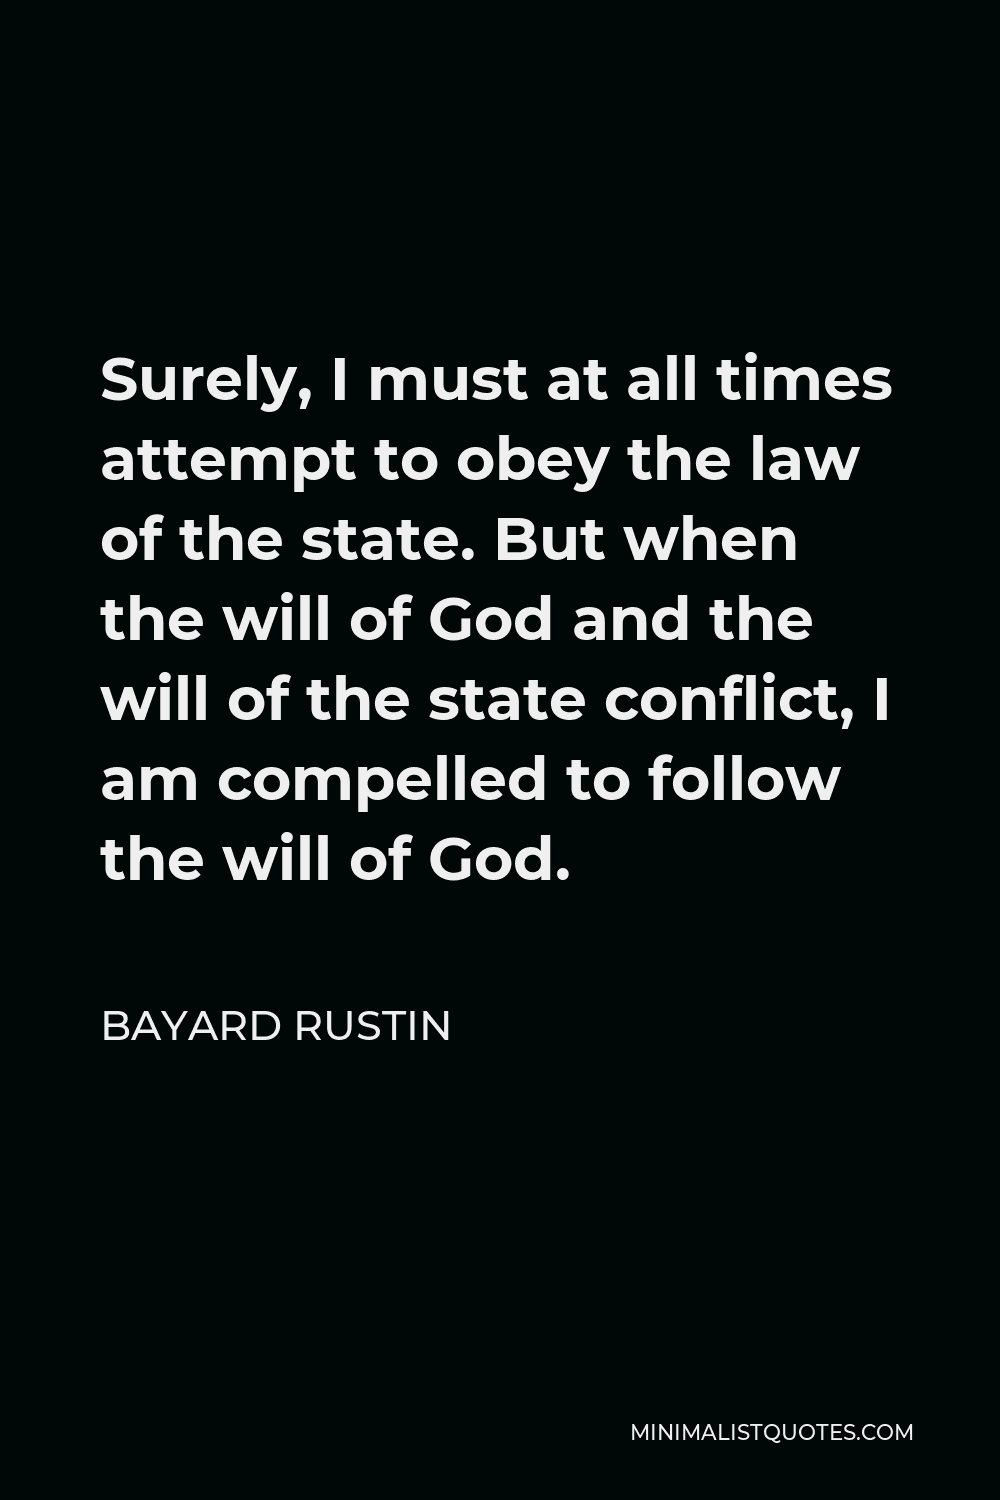 Bayard Rustin Quote - Surely, I must at all times attempt to obey the law of the state. But when the will of God and the will of the state conflict, I am compelled to follow the will of God.